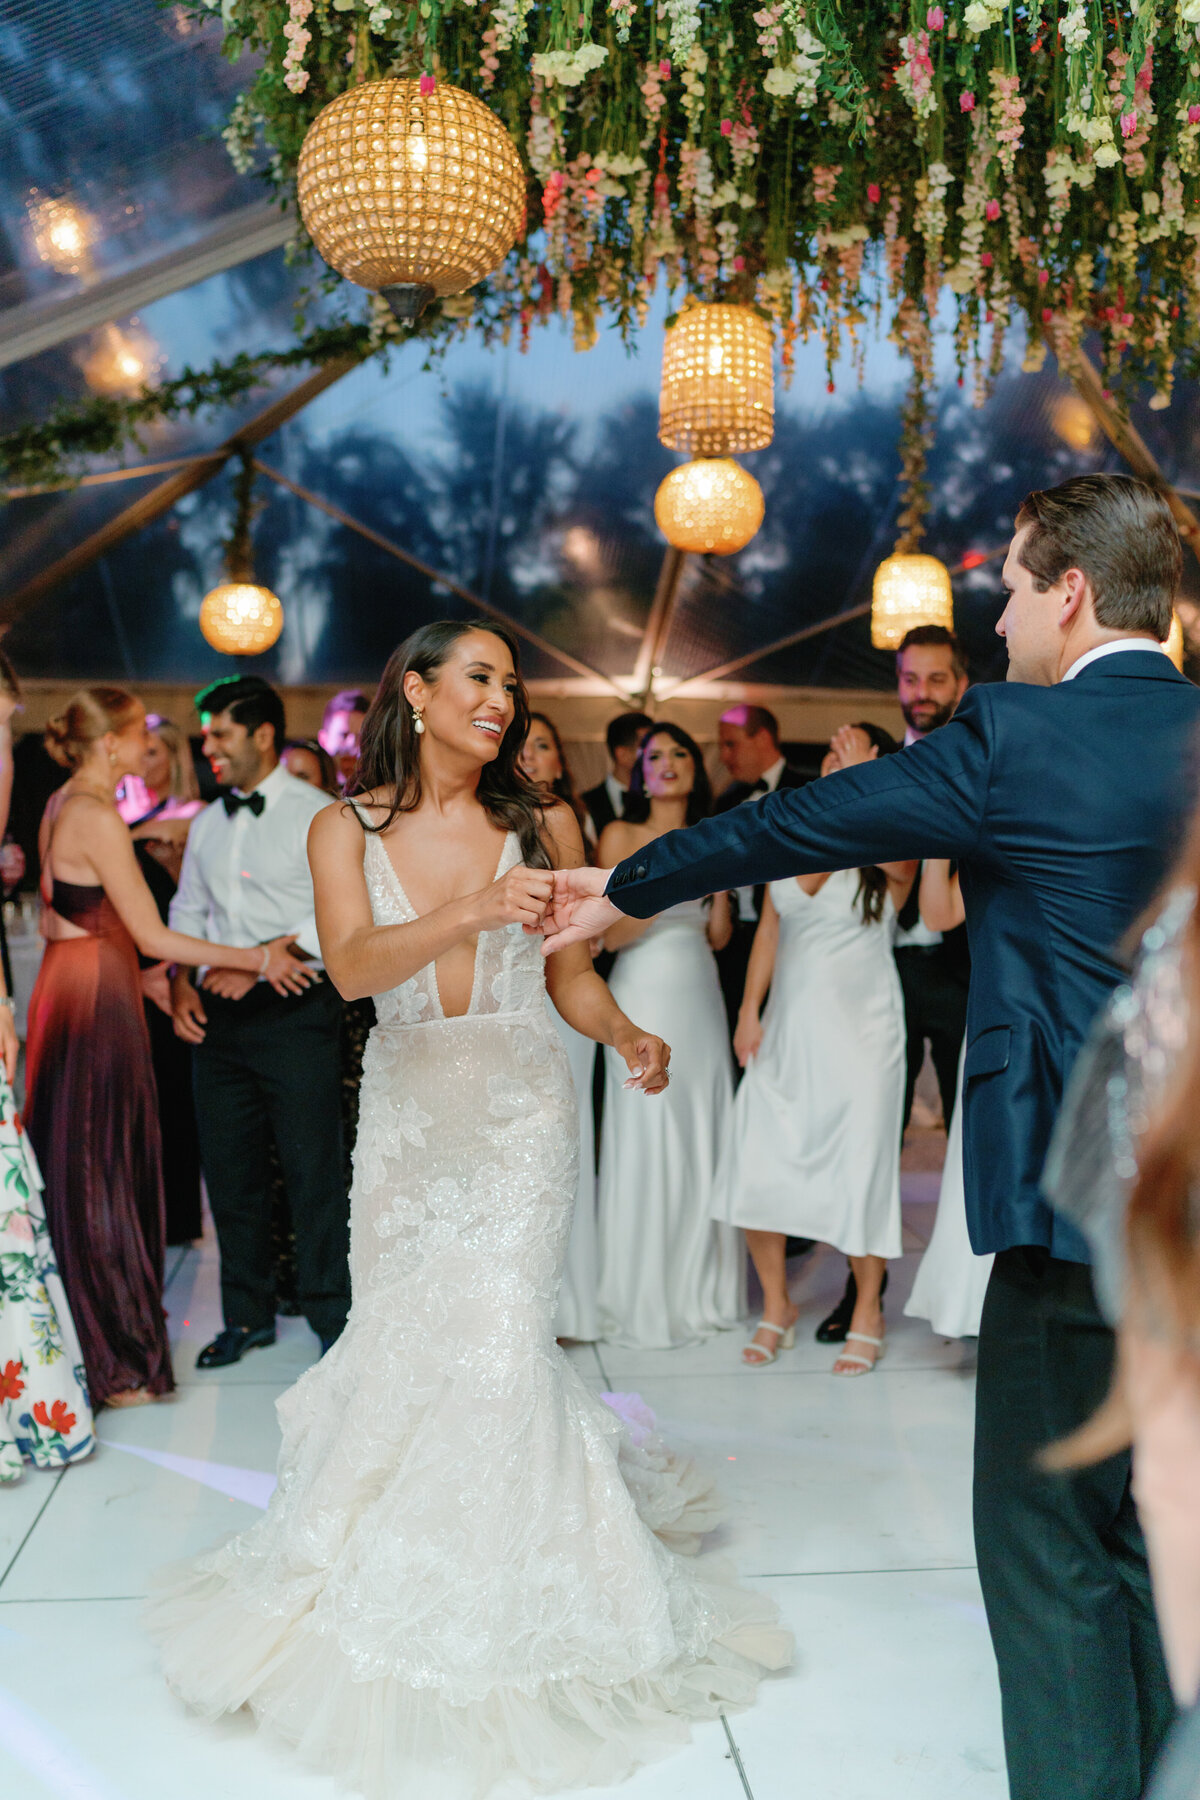 Dark haired bride with plunging neckline Berta wedding dress on all white dance floor with groom in the crowd. Hanging birdcage lighting and upside-down florals.  Spring Thomas Bennett House wedding in Charleston.